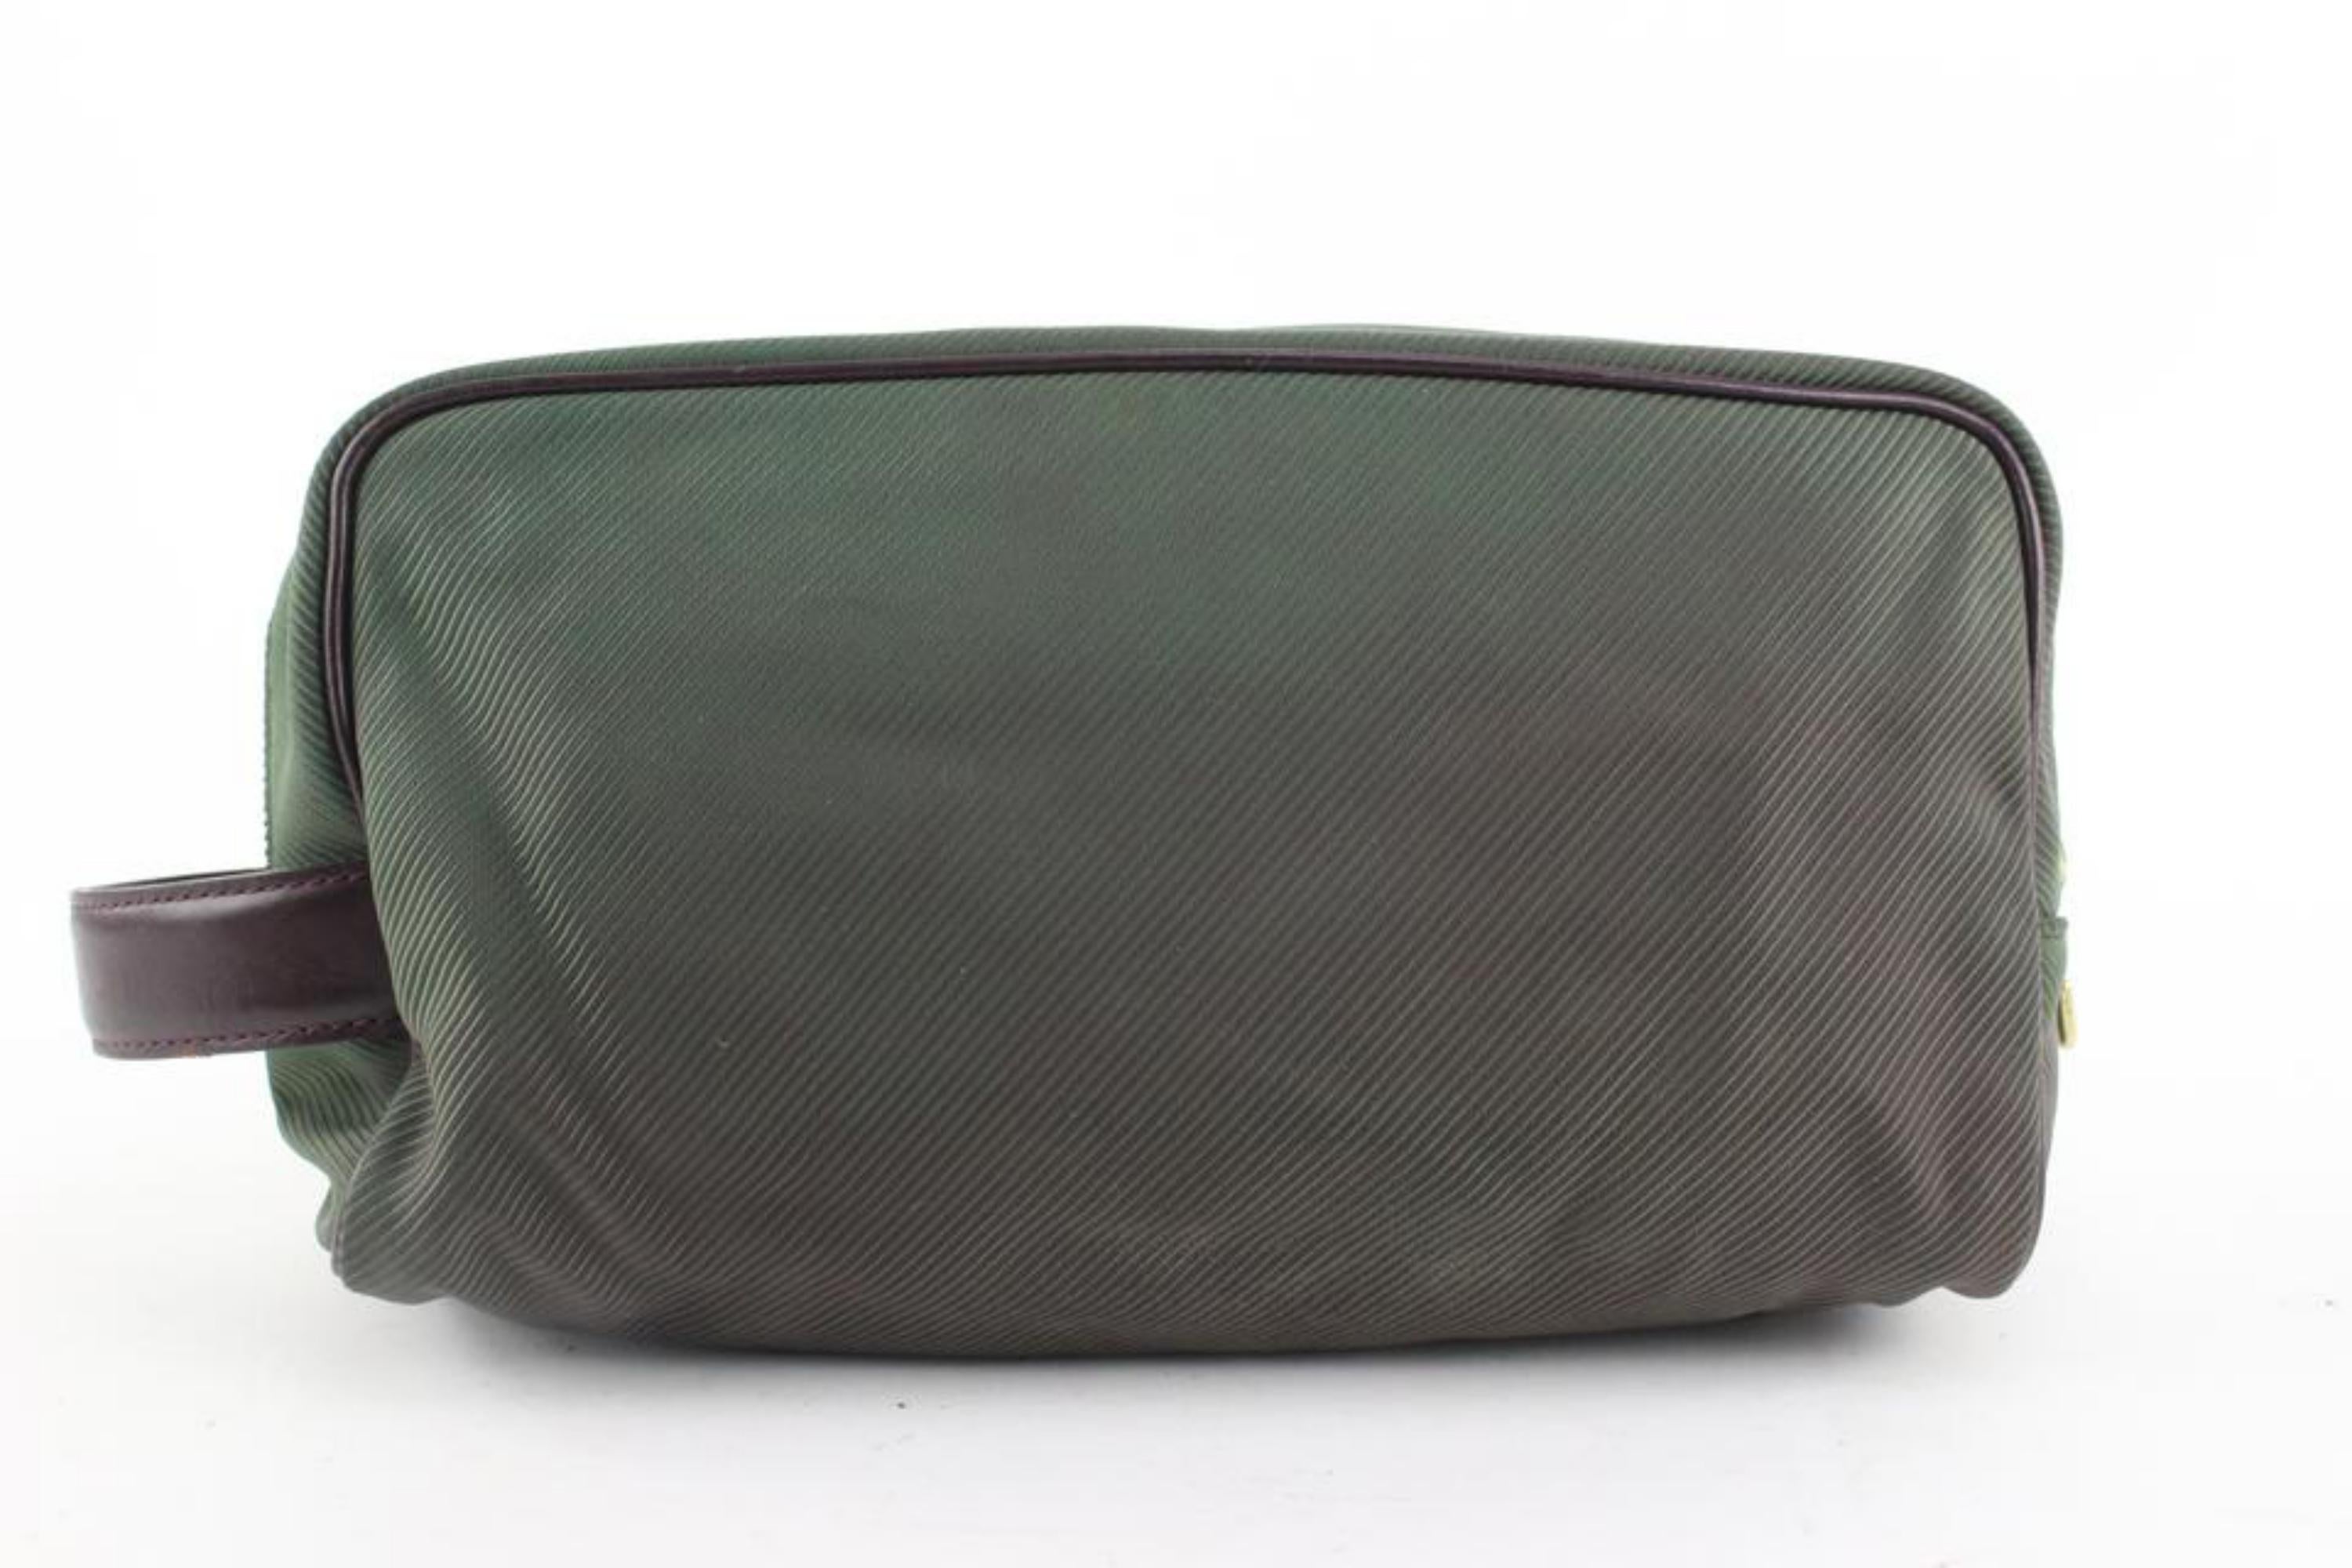 Louis Vuitton Green Palana Trousse Cosmetic Pouch Make Up Toiletry Case 1224lv29 For Sale 1